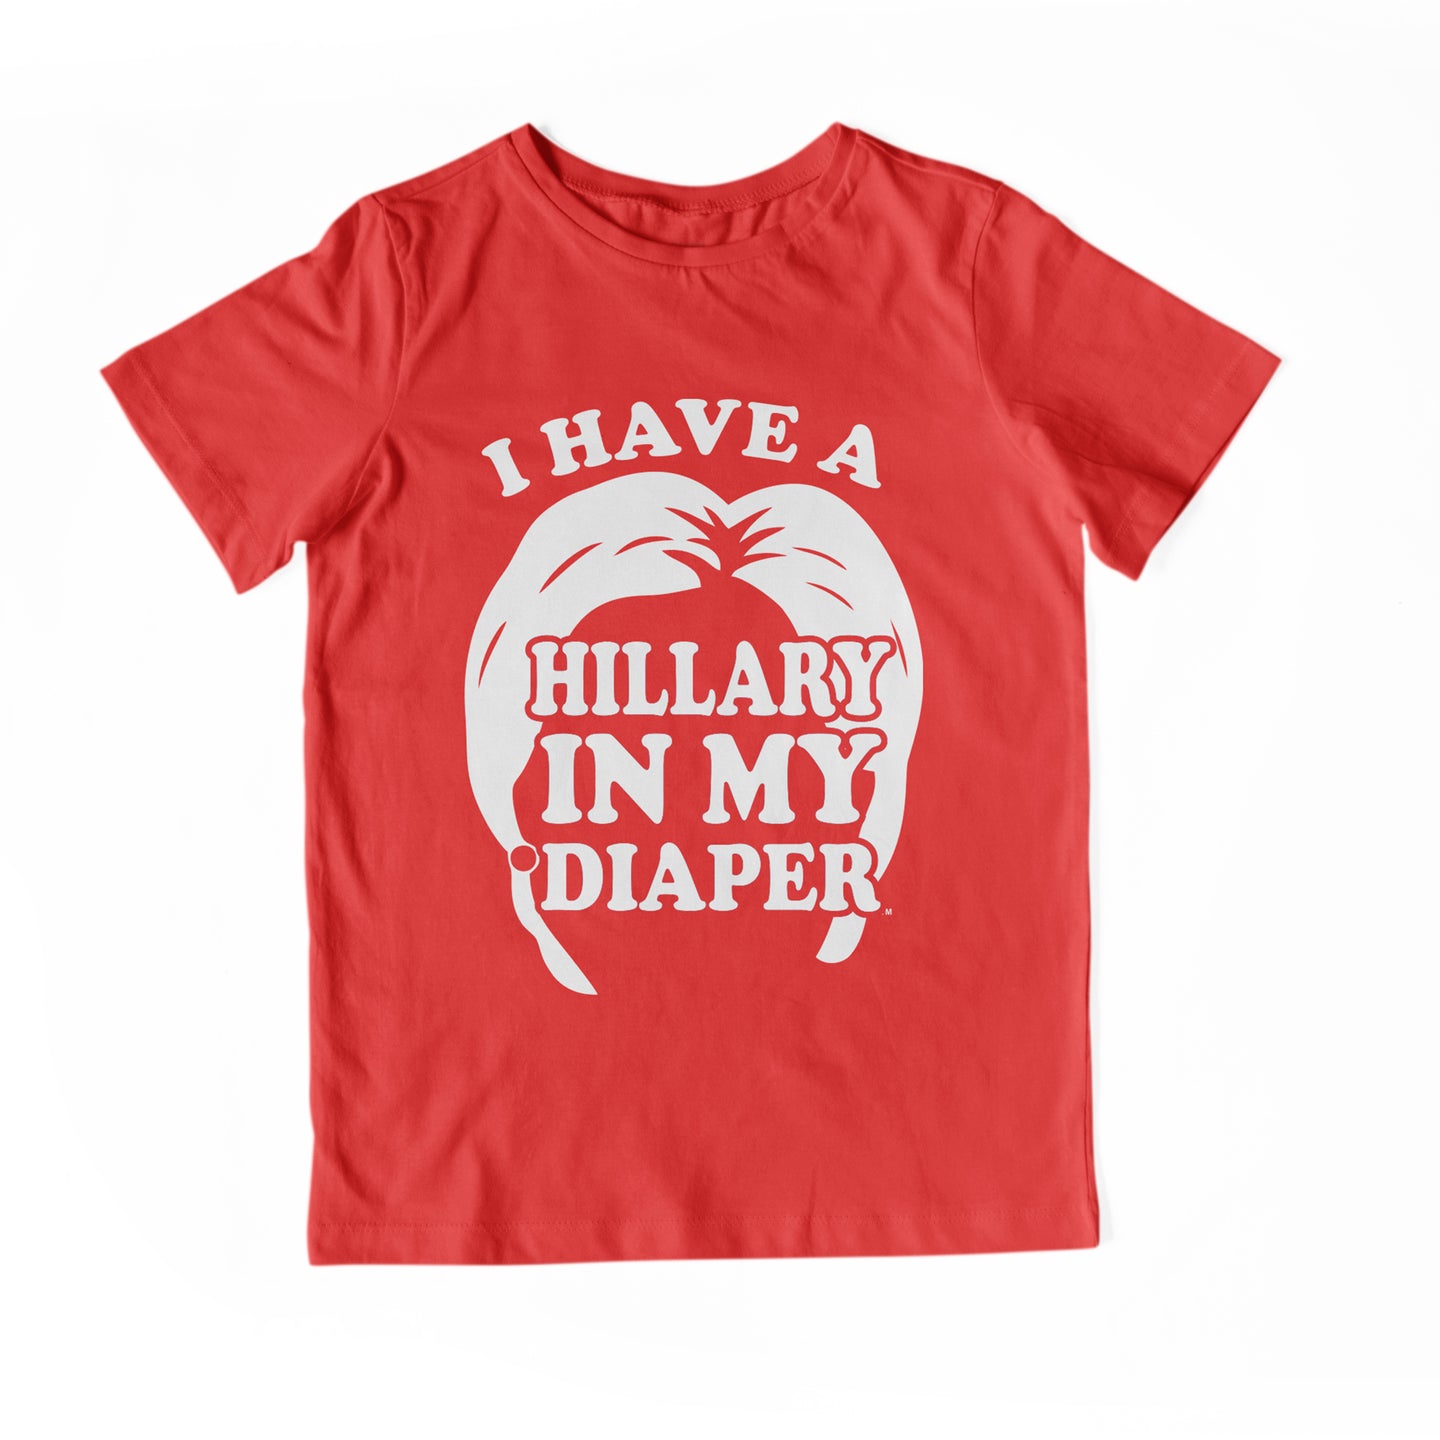 I HAVE A HILLARY IN MY DIAPER Child Tee